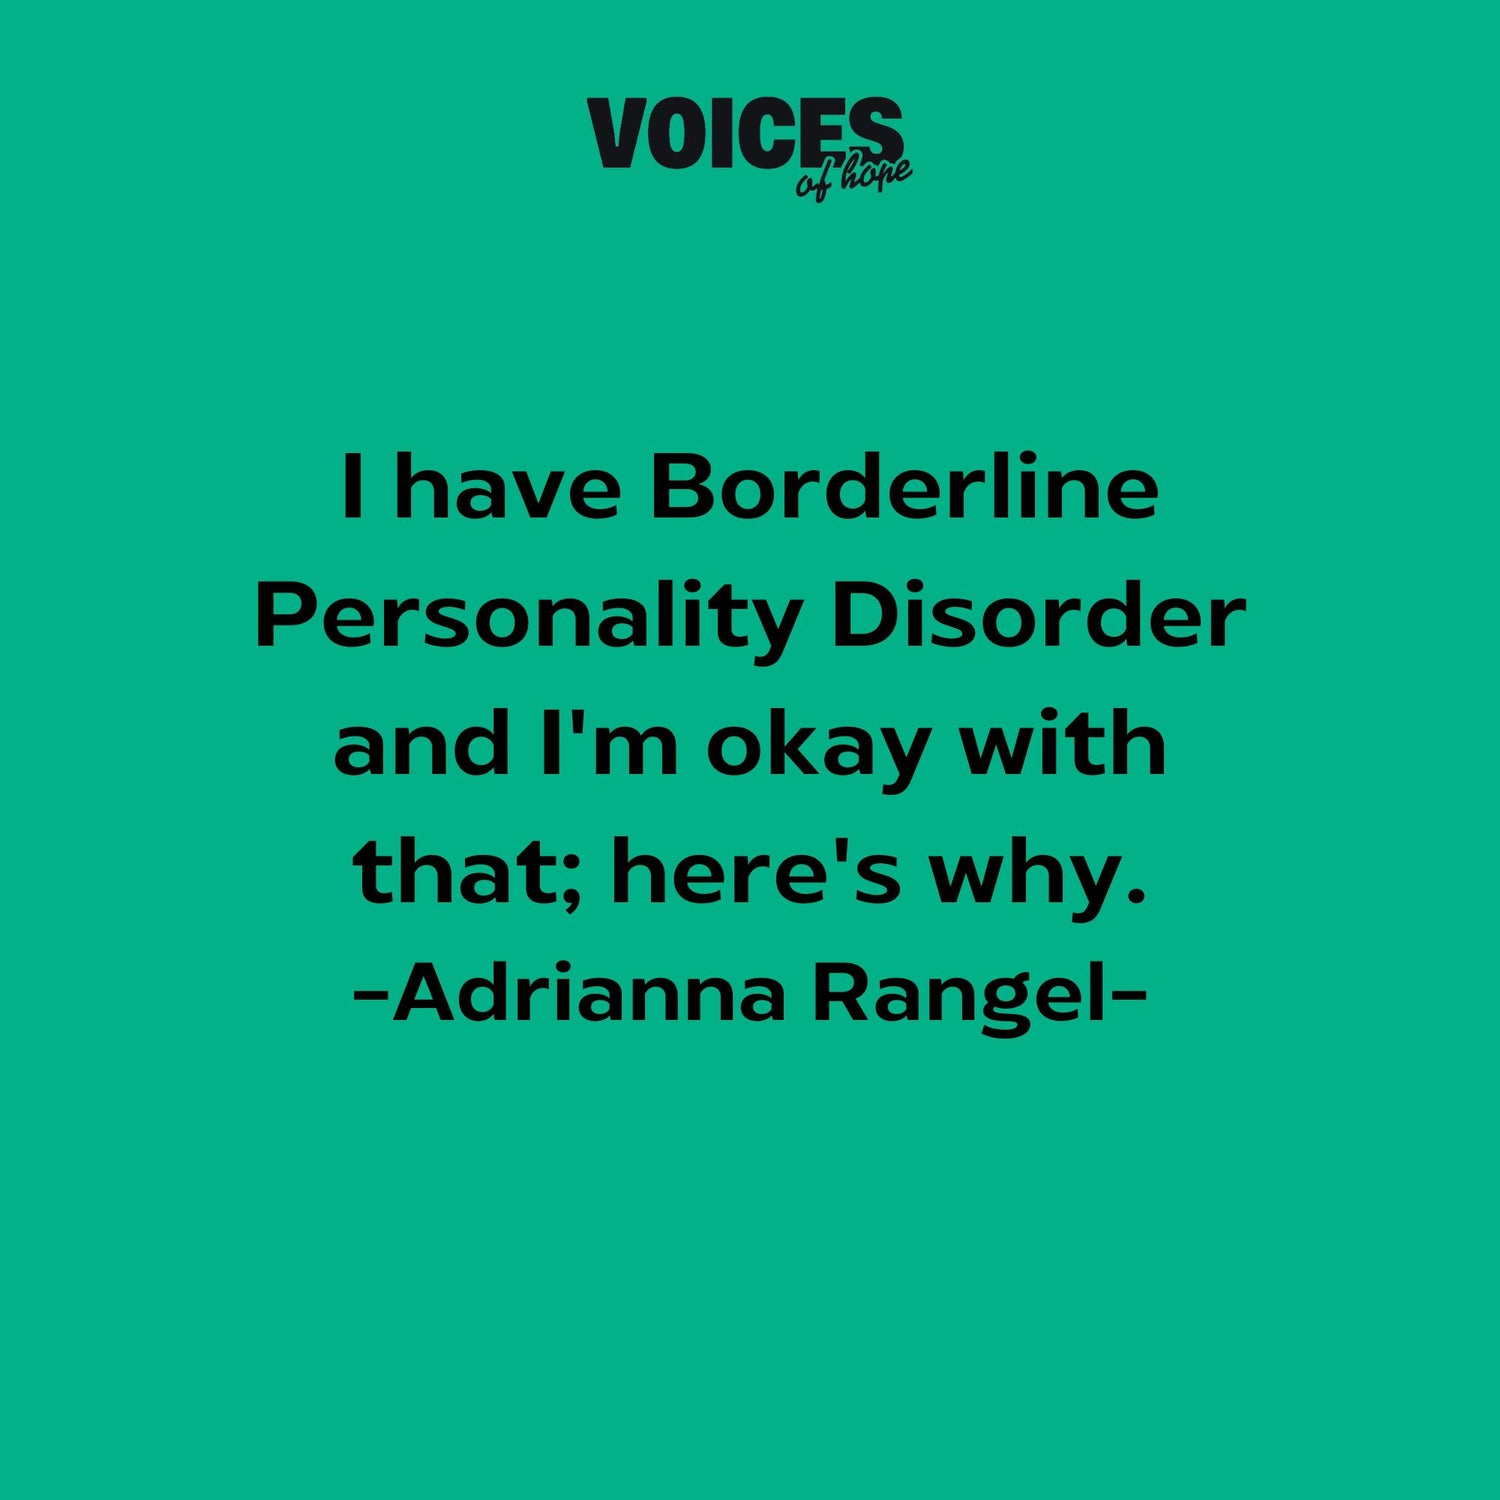 Green background with black writing that reads: "I have Borderline Personality Disorder and I'm okay with that; here's why. Adrianna Rangel."